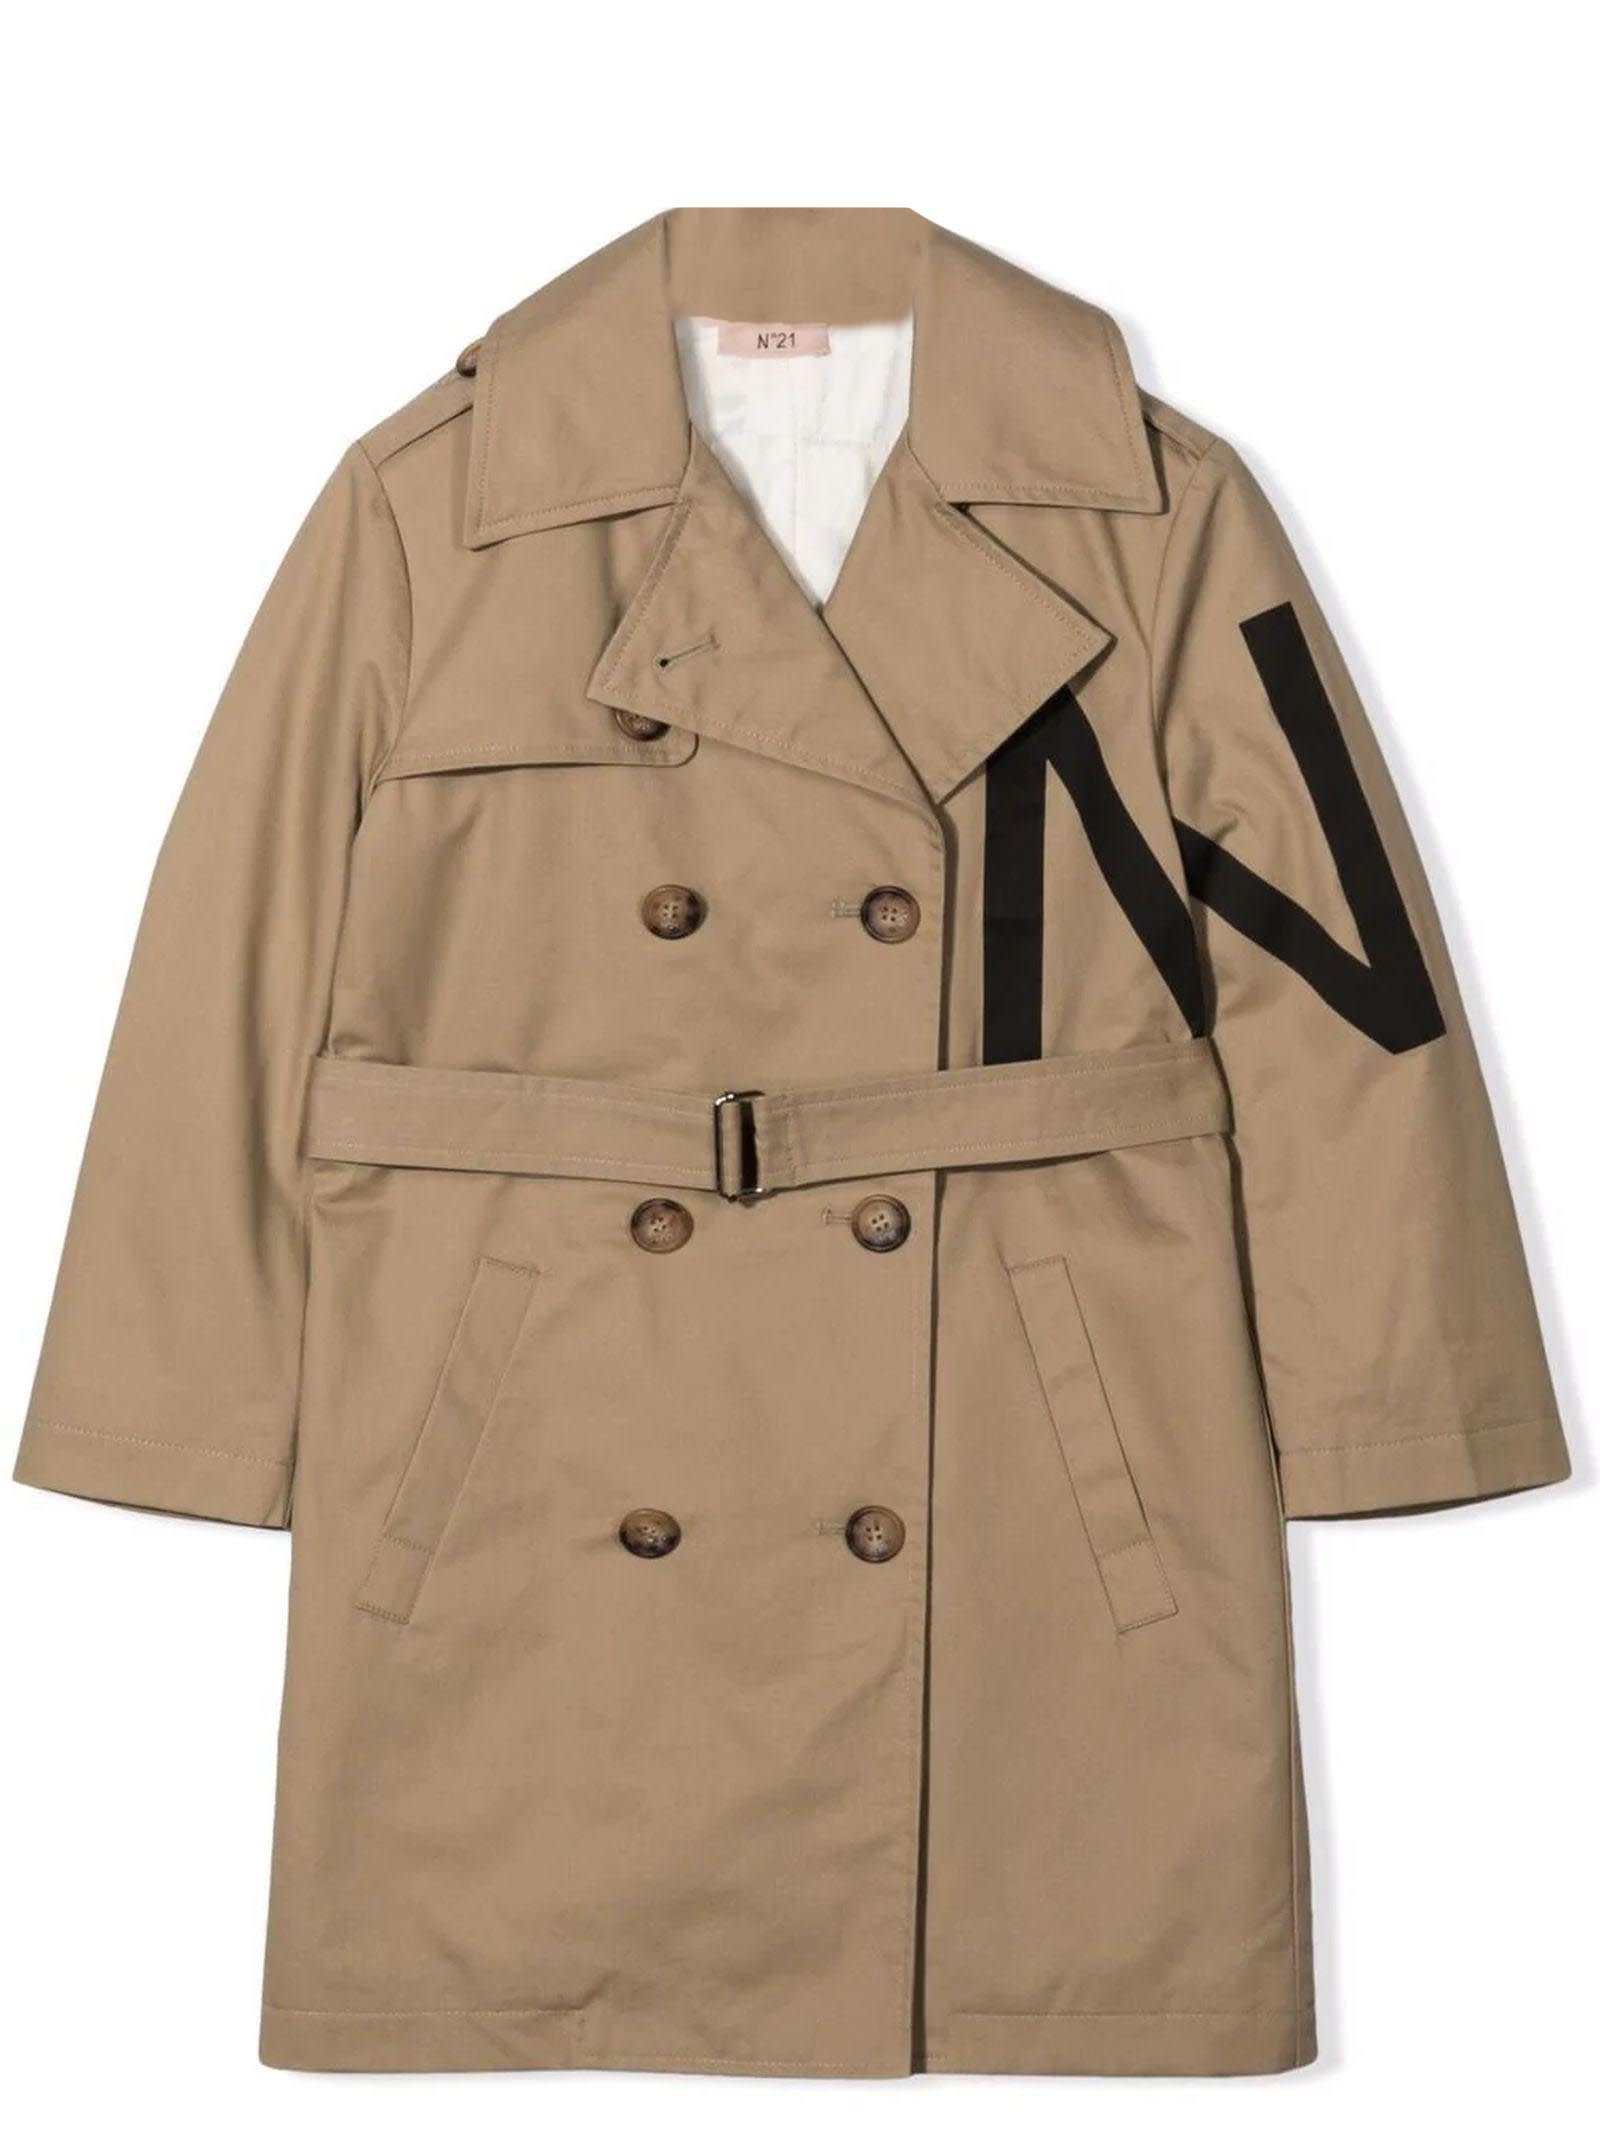 N.21 New Camel Brown Cotton Trench Coat